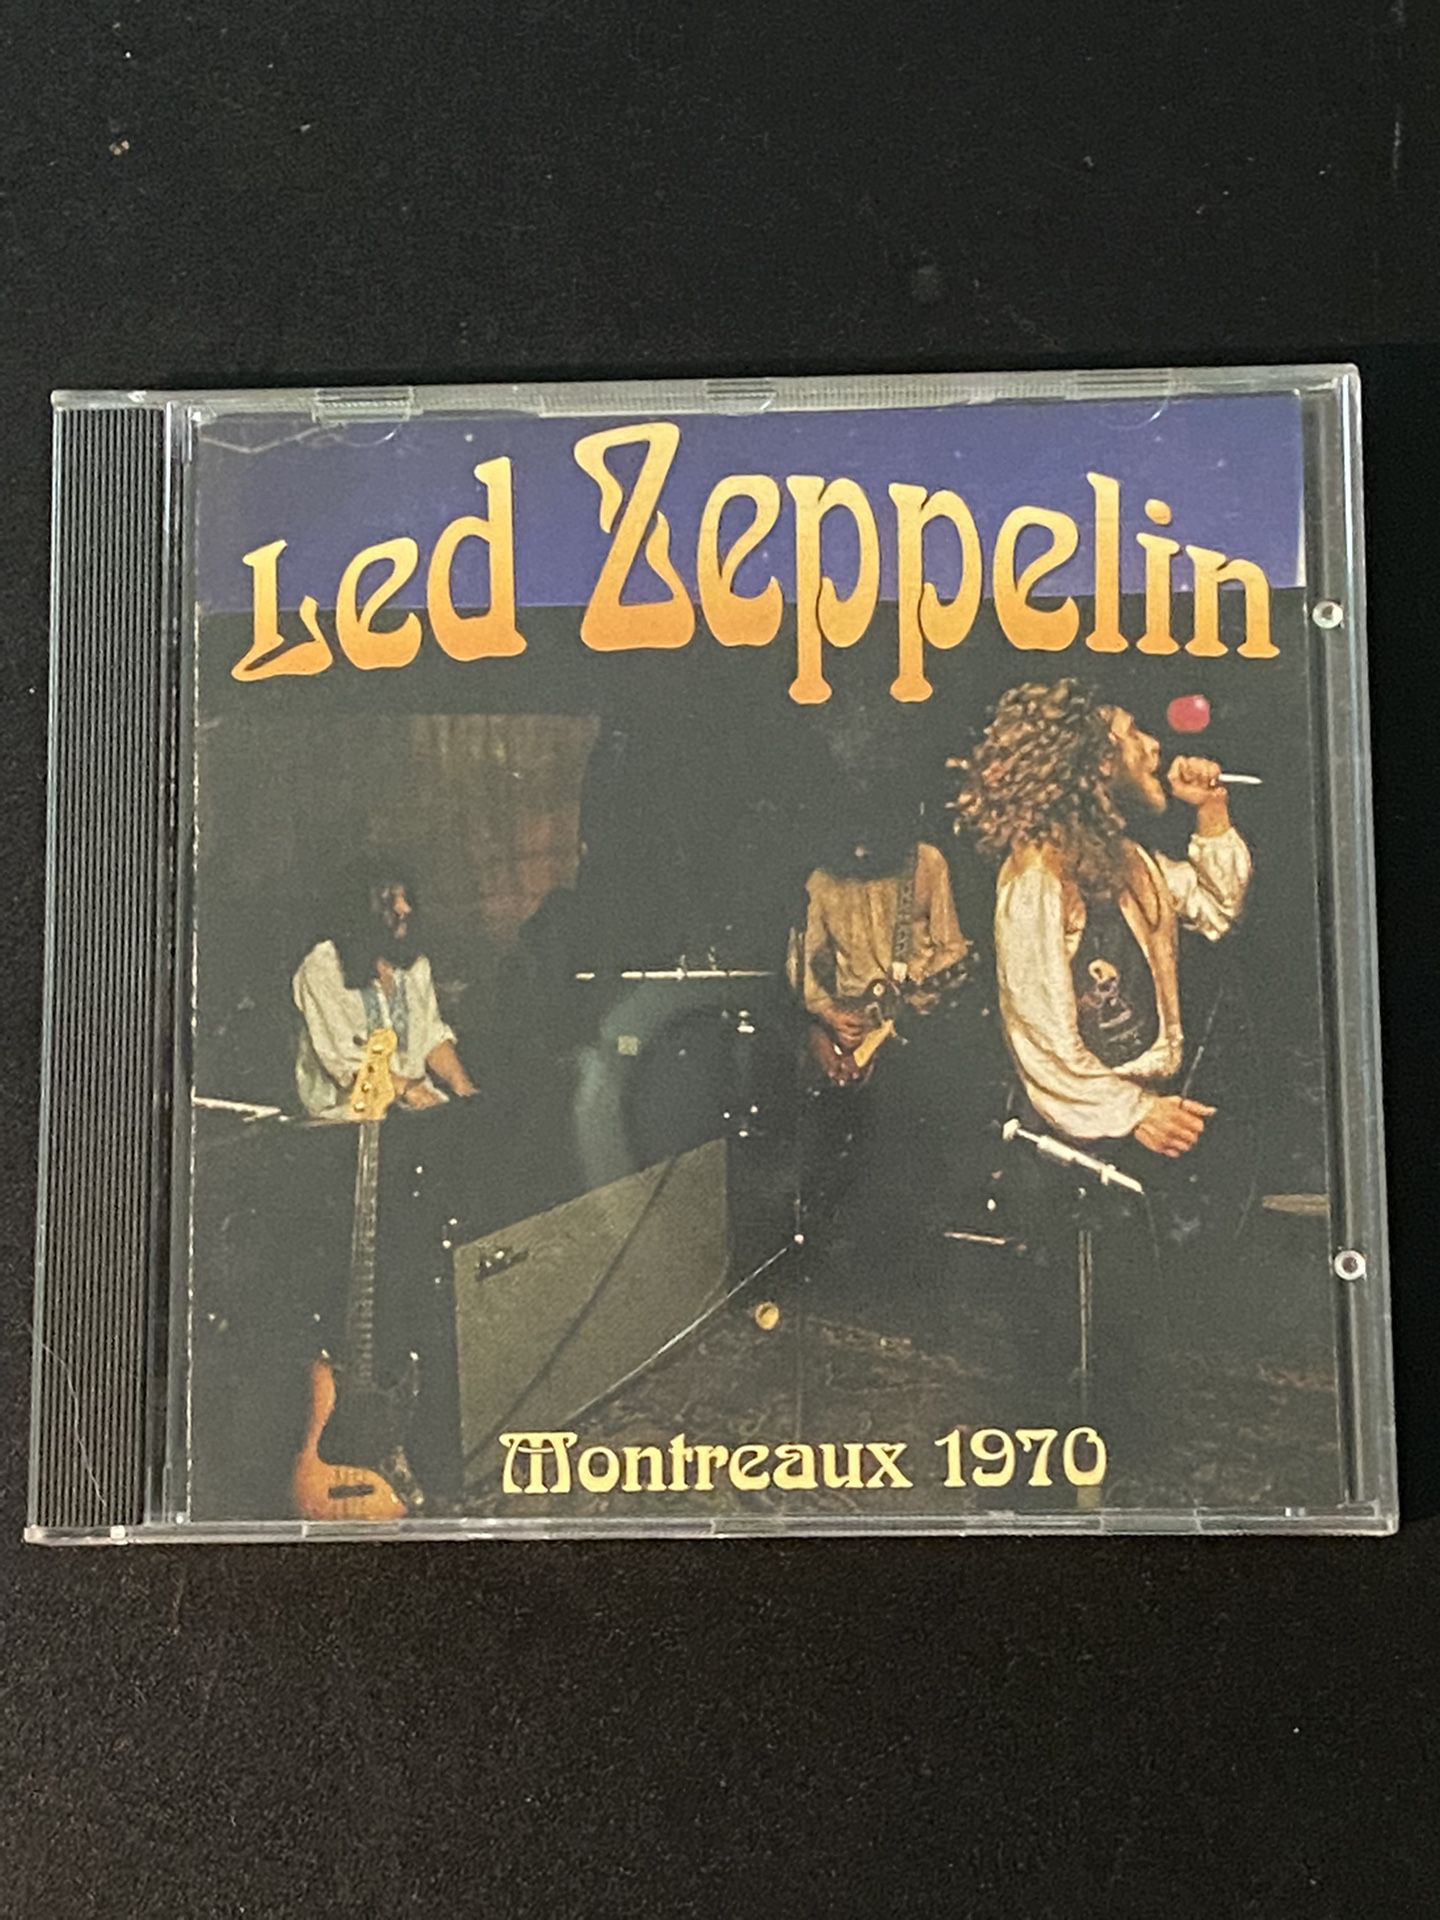 Led Zeppelin – Montreaux 1970 cd. Rare & Hard to find. Recorded live at the Montreaux Jazz Festival, Montreaux, Switzerland March 14th 1970. Fantastic